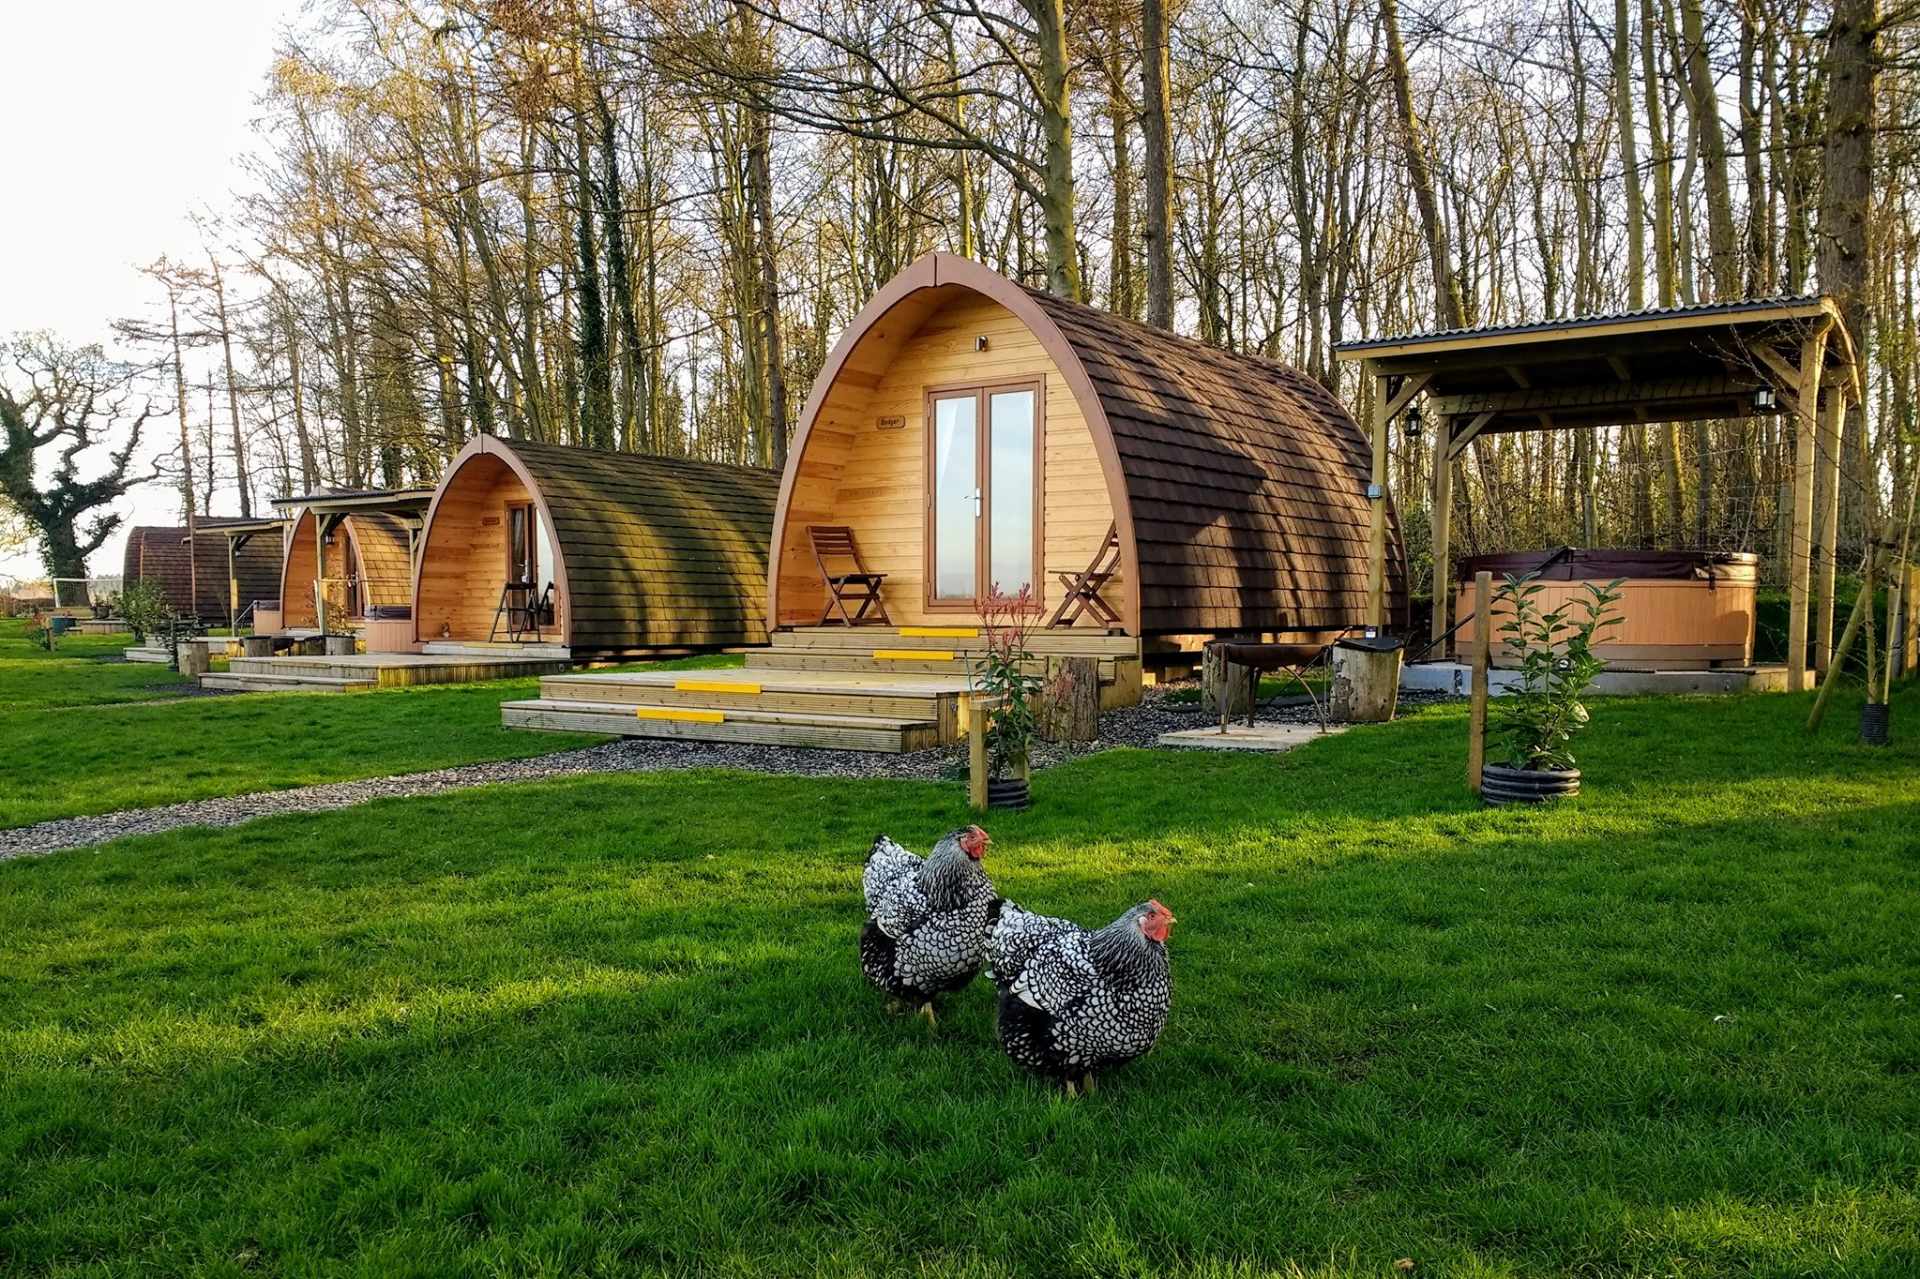 thornfield-glamping-pods-glamping-with-hot-tub-lake-district